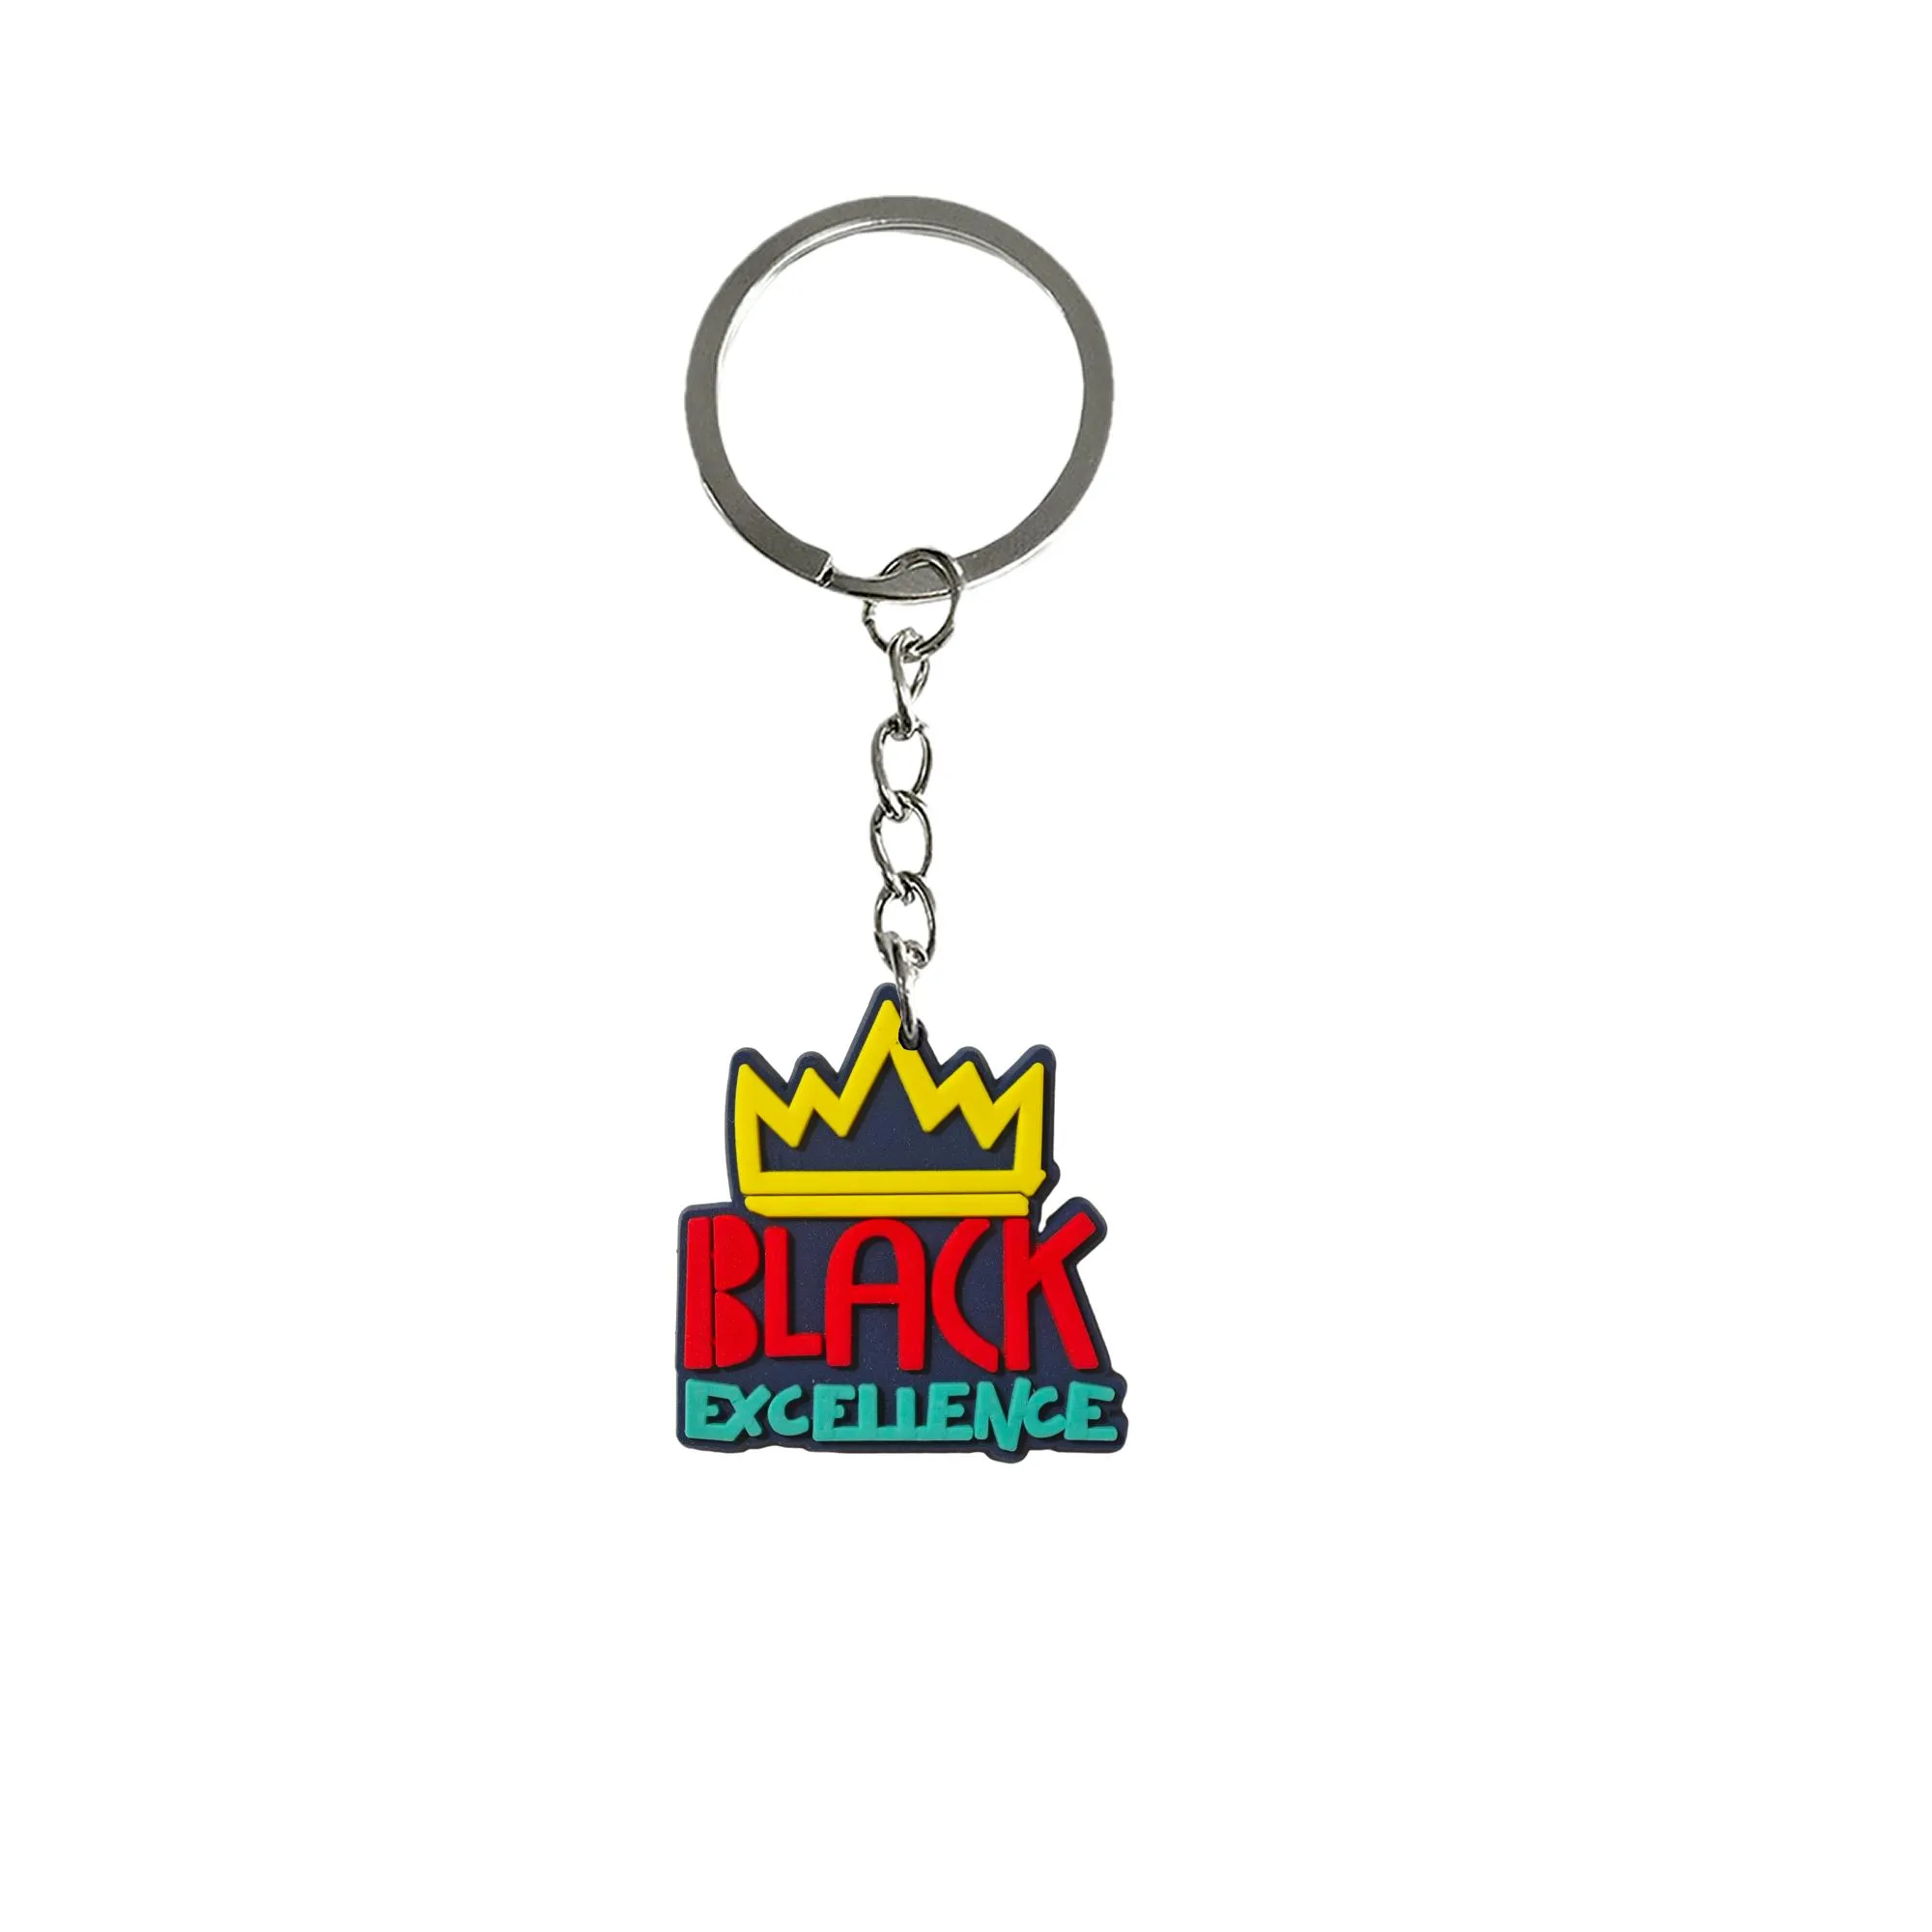 black keychain key ring for women pendants accessories kids birthday party favors rings keyring suitable schoolbag couple backpack chains boys goodie bag stuffers supplies